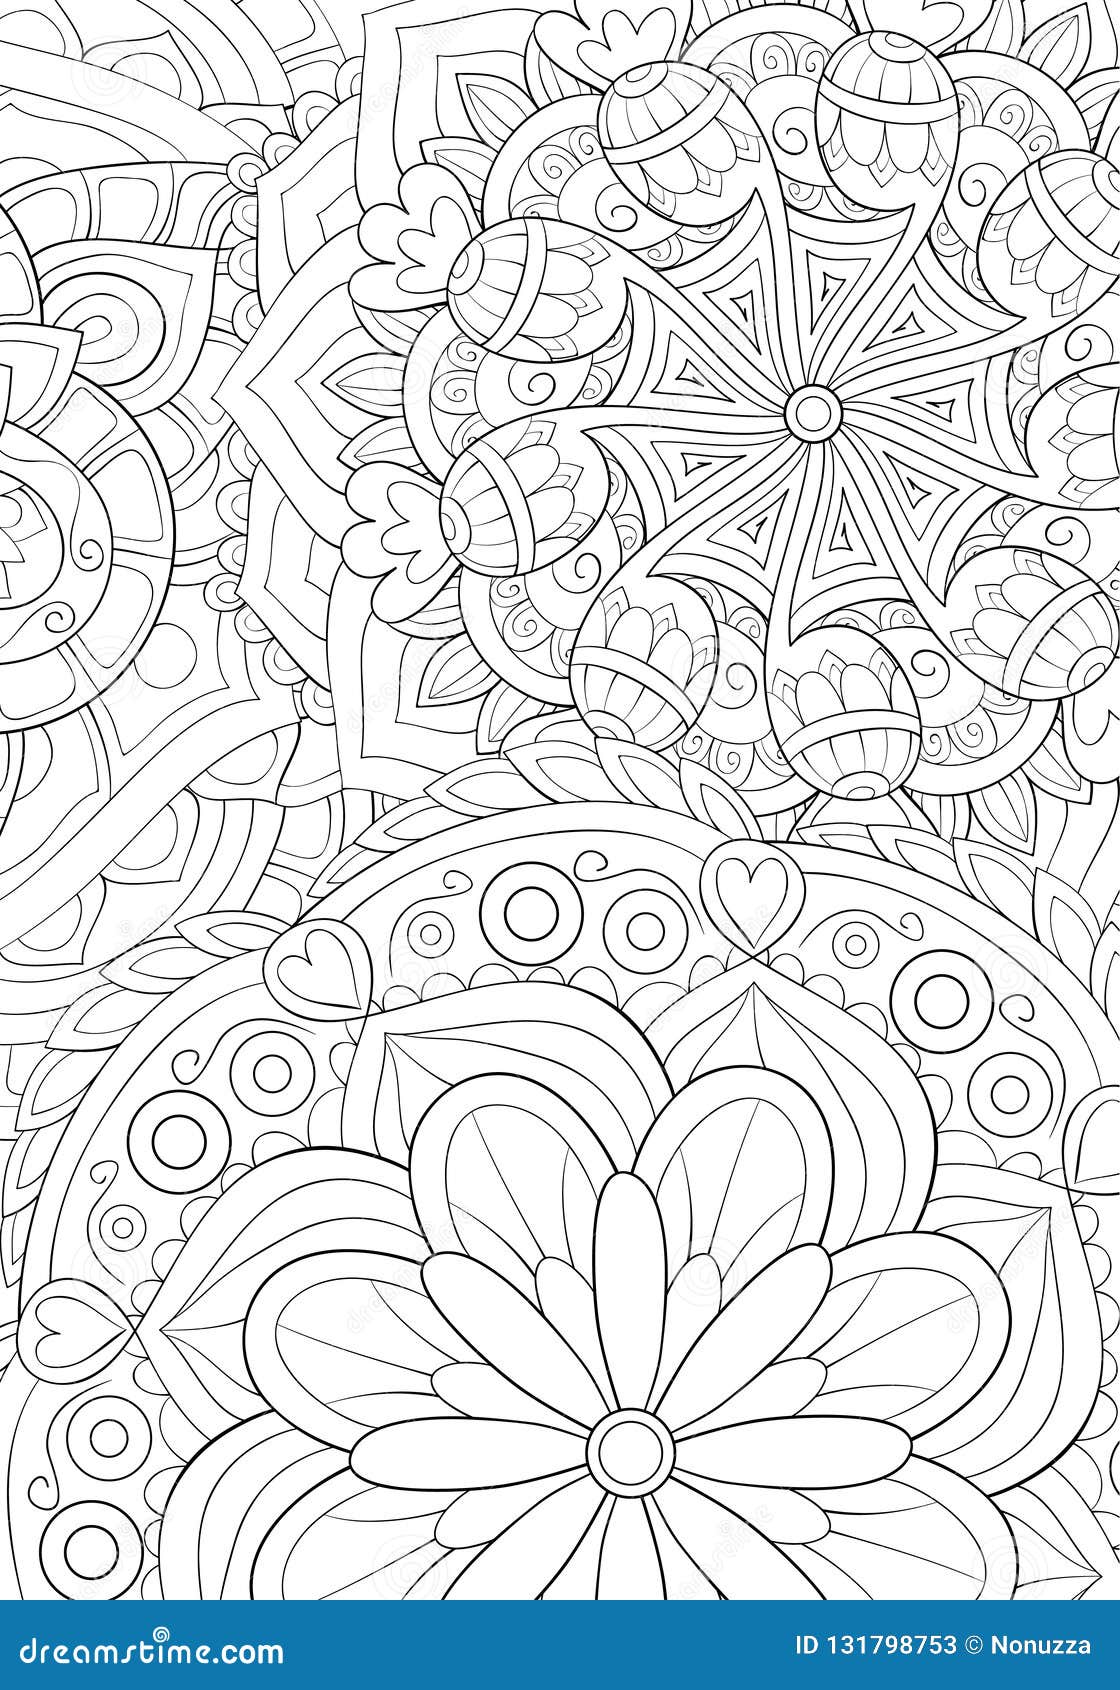 Adult Coloring Book,page a Zen Abstract Background for Relaxing ...